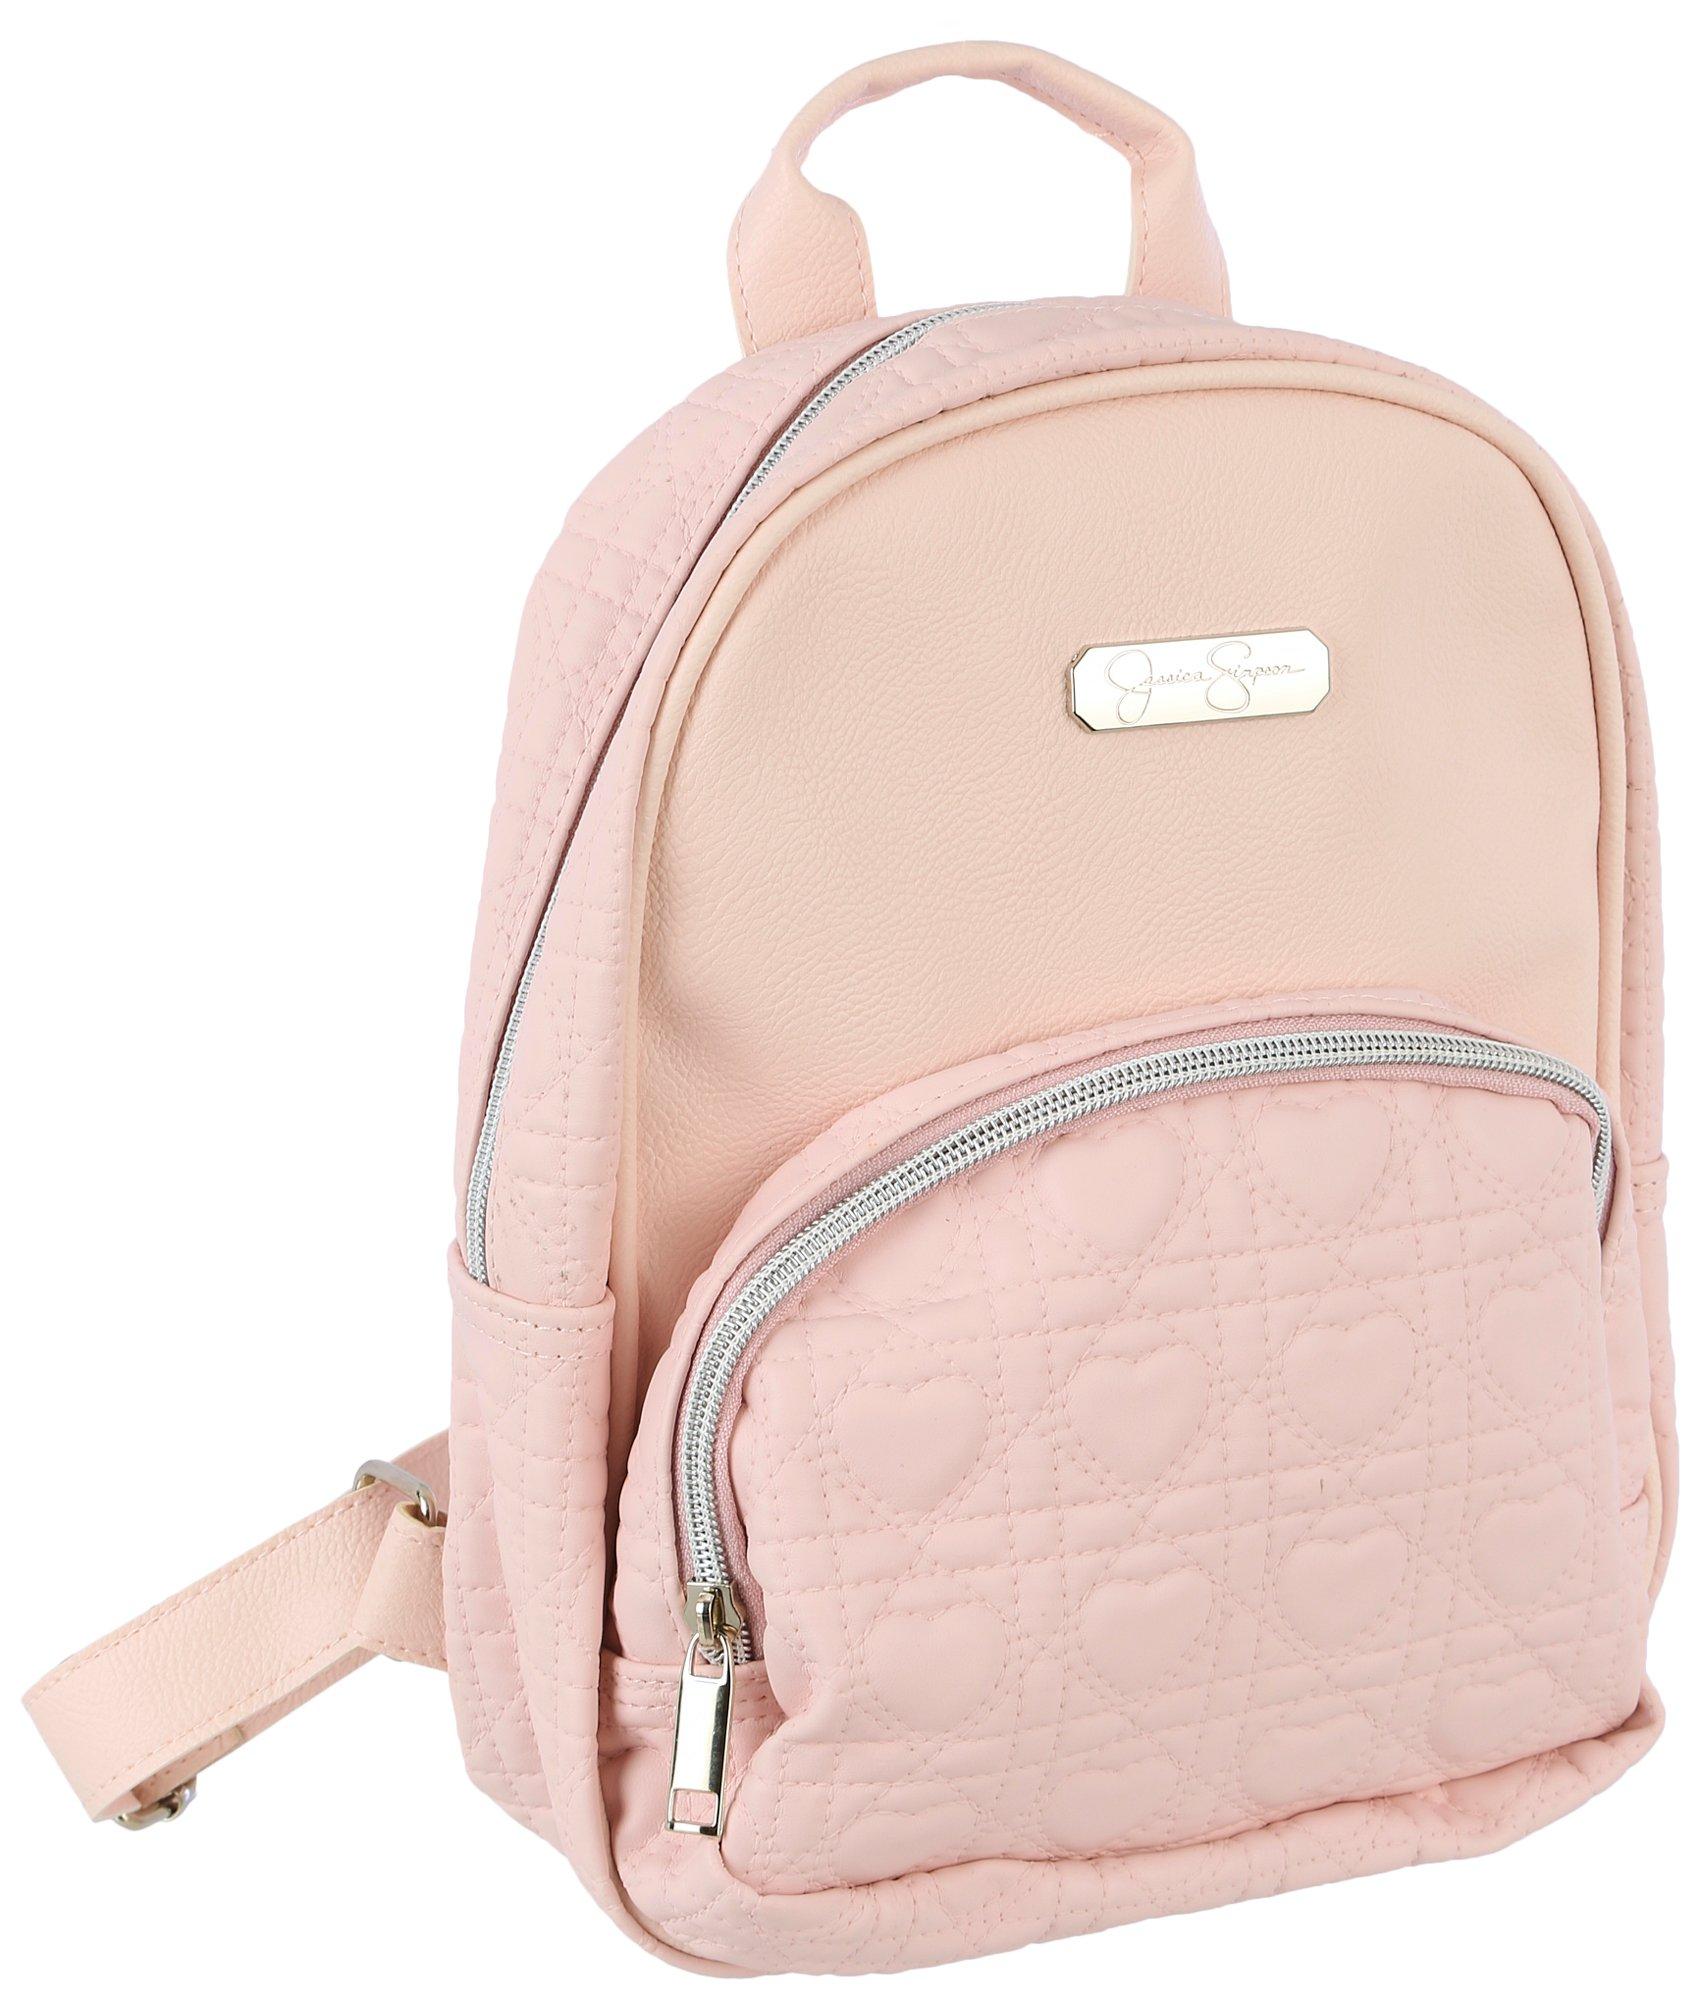 Jessica Simpson Girls Faux Leather Backpack